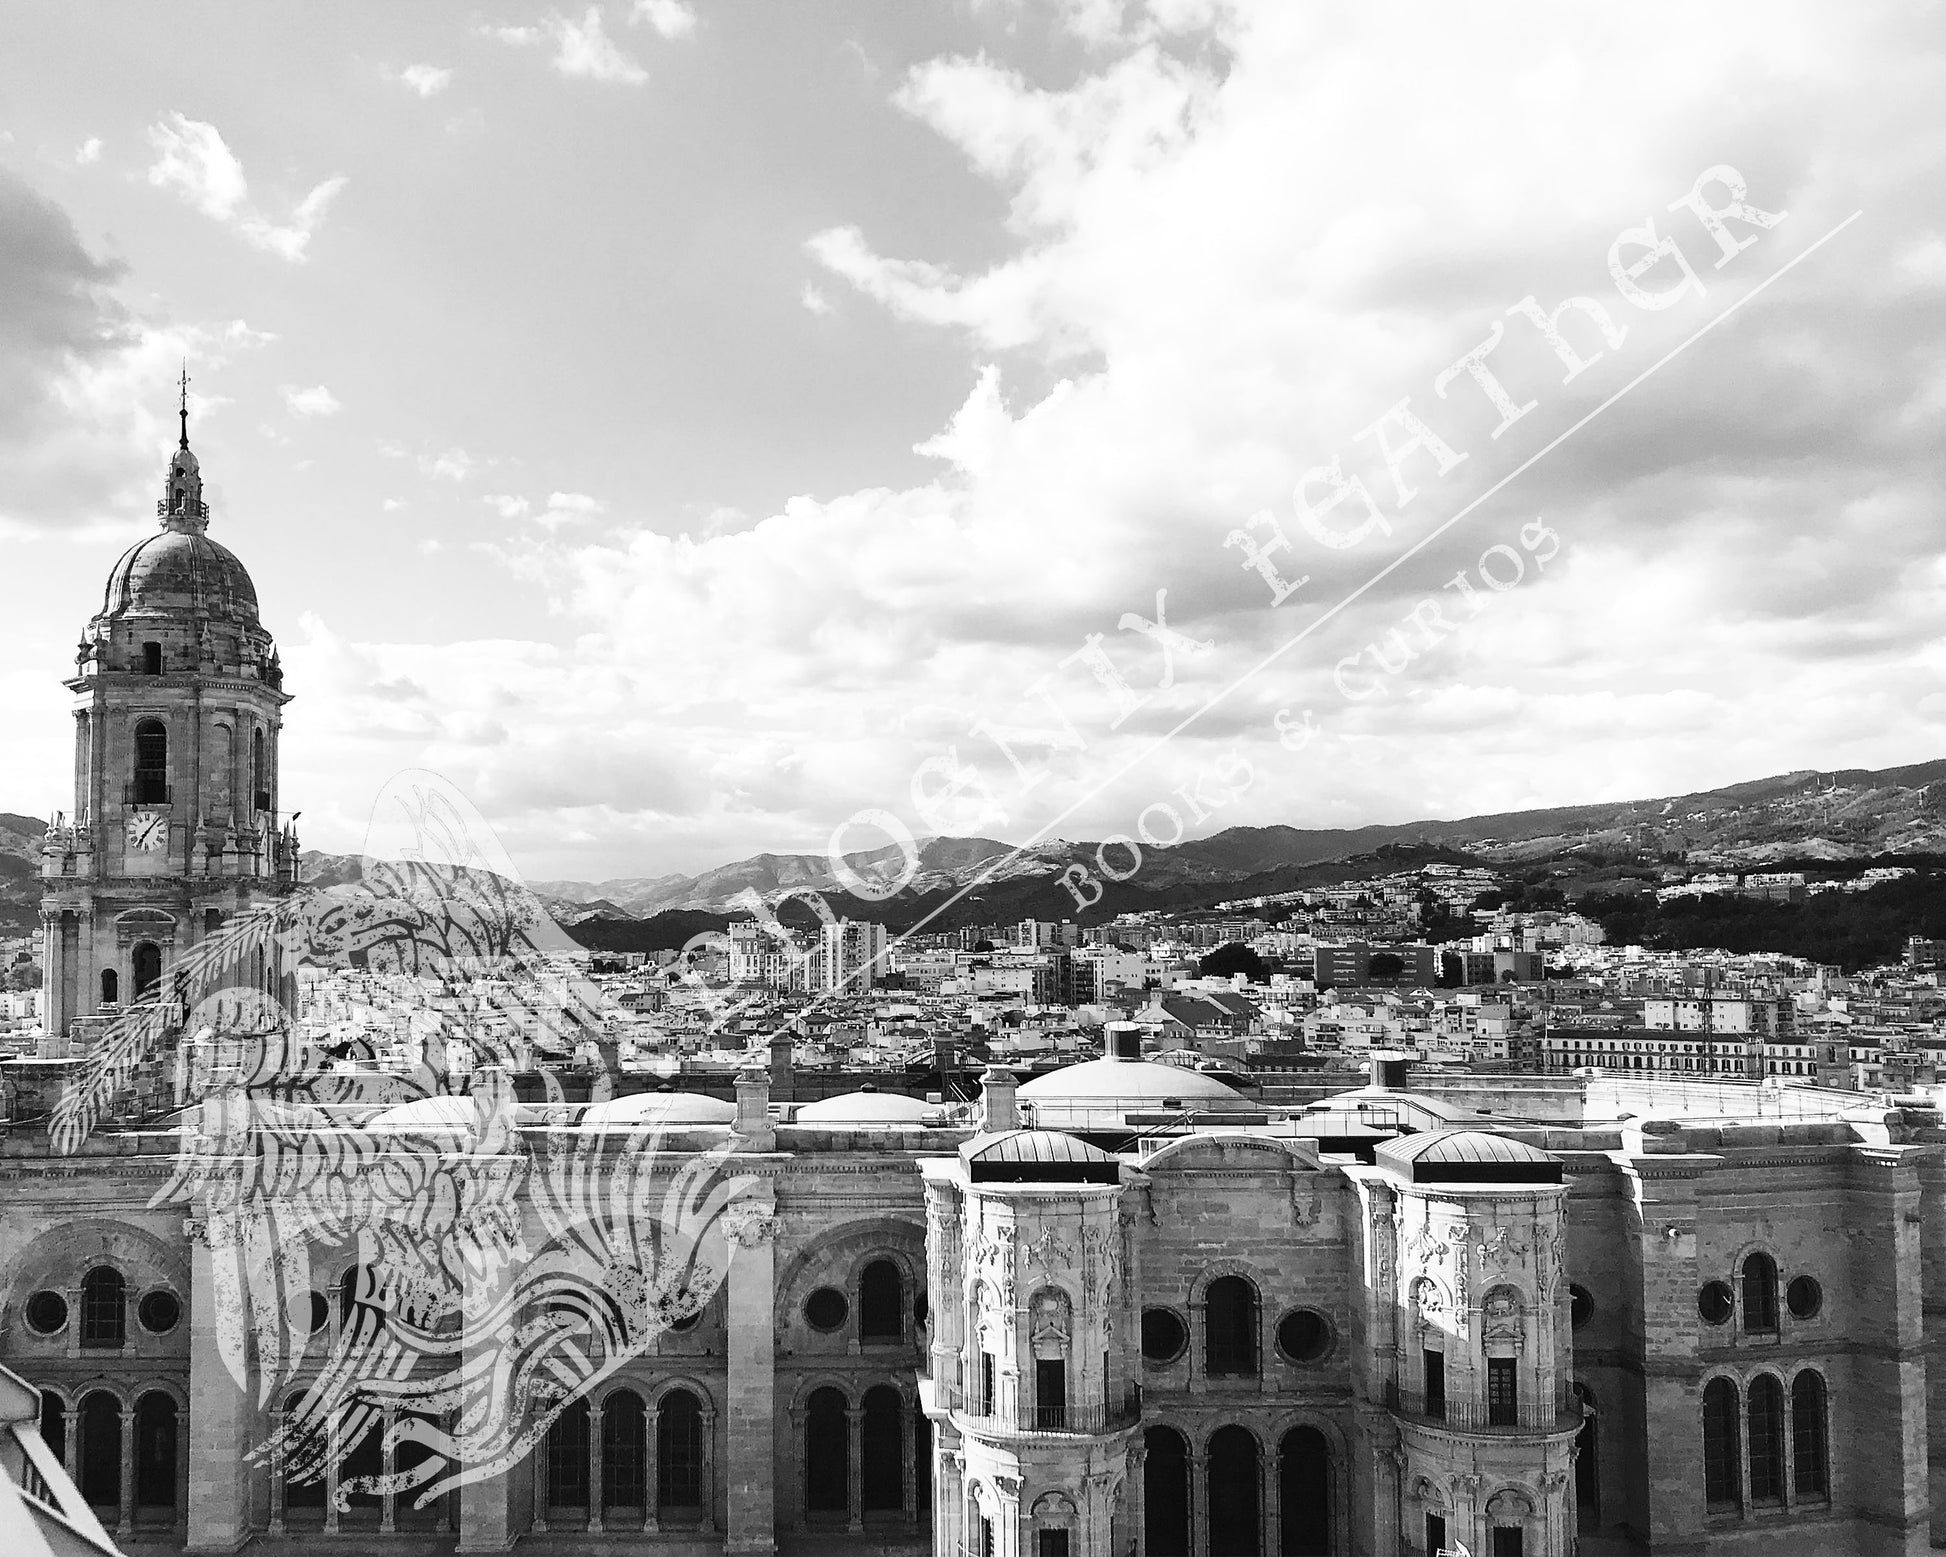 Travel photography for sale.  Gifts for history lovers and travelers. Black and white photograph of Malaga, Spain with the Malaga Cathedral in the foreground.  Malaga is a beautiful city along the Costa del Sol.